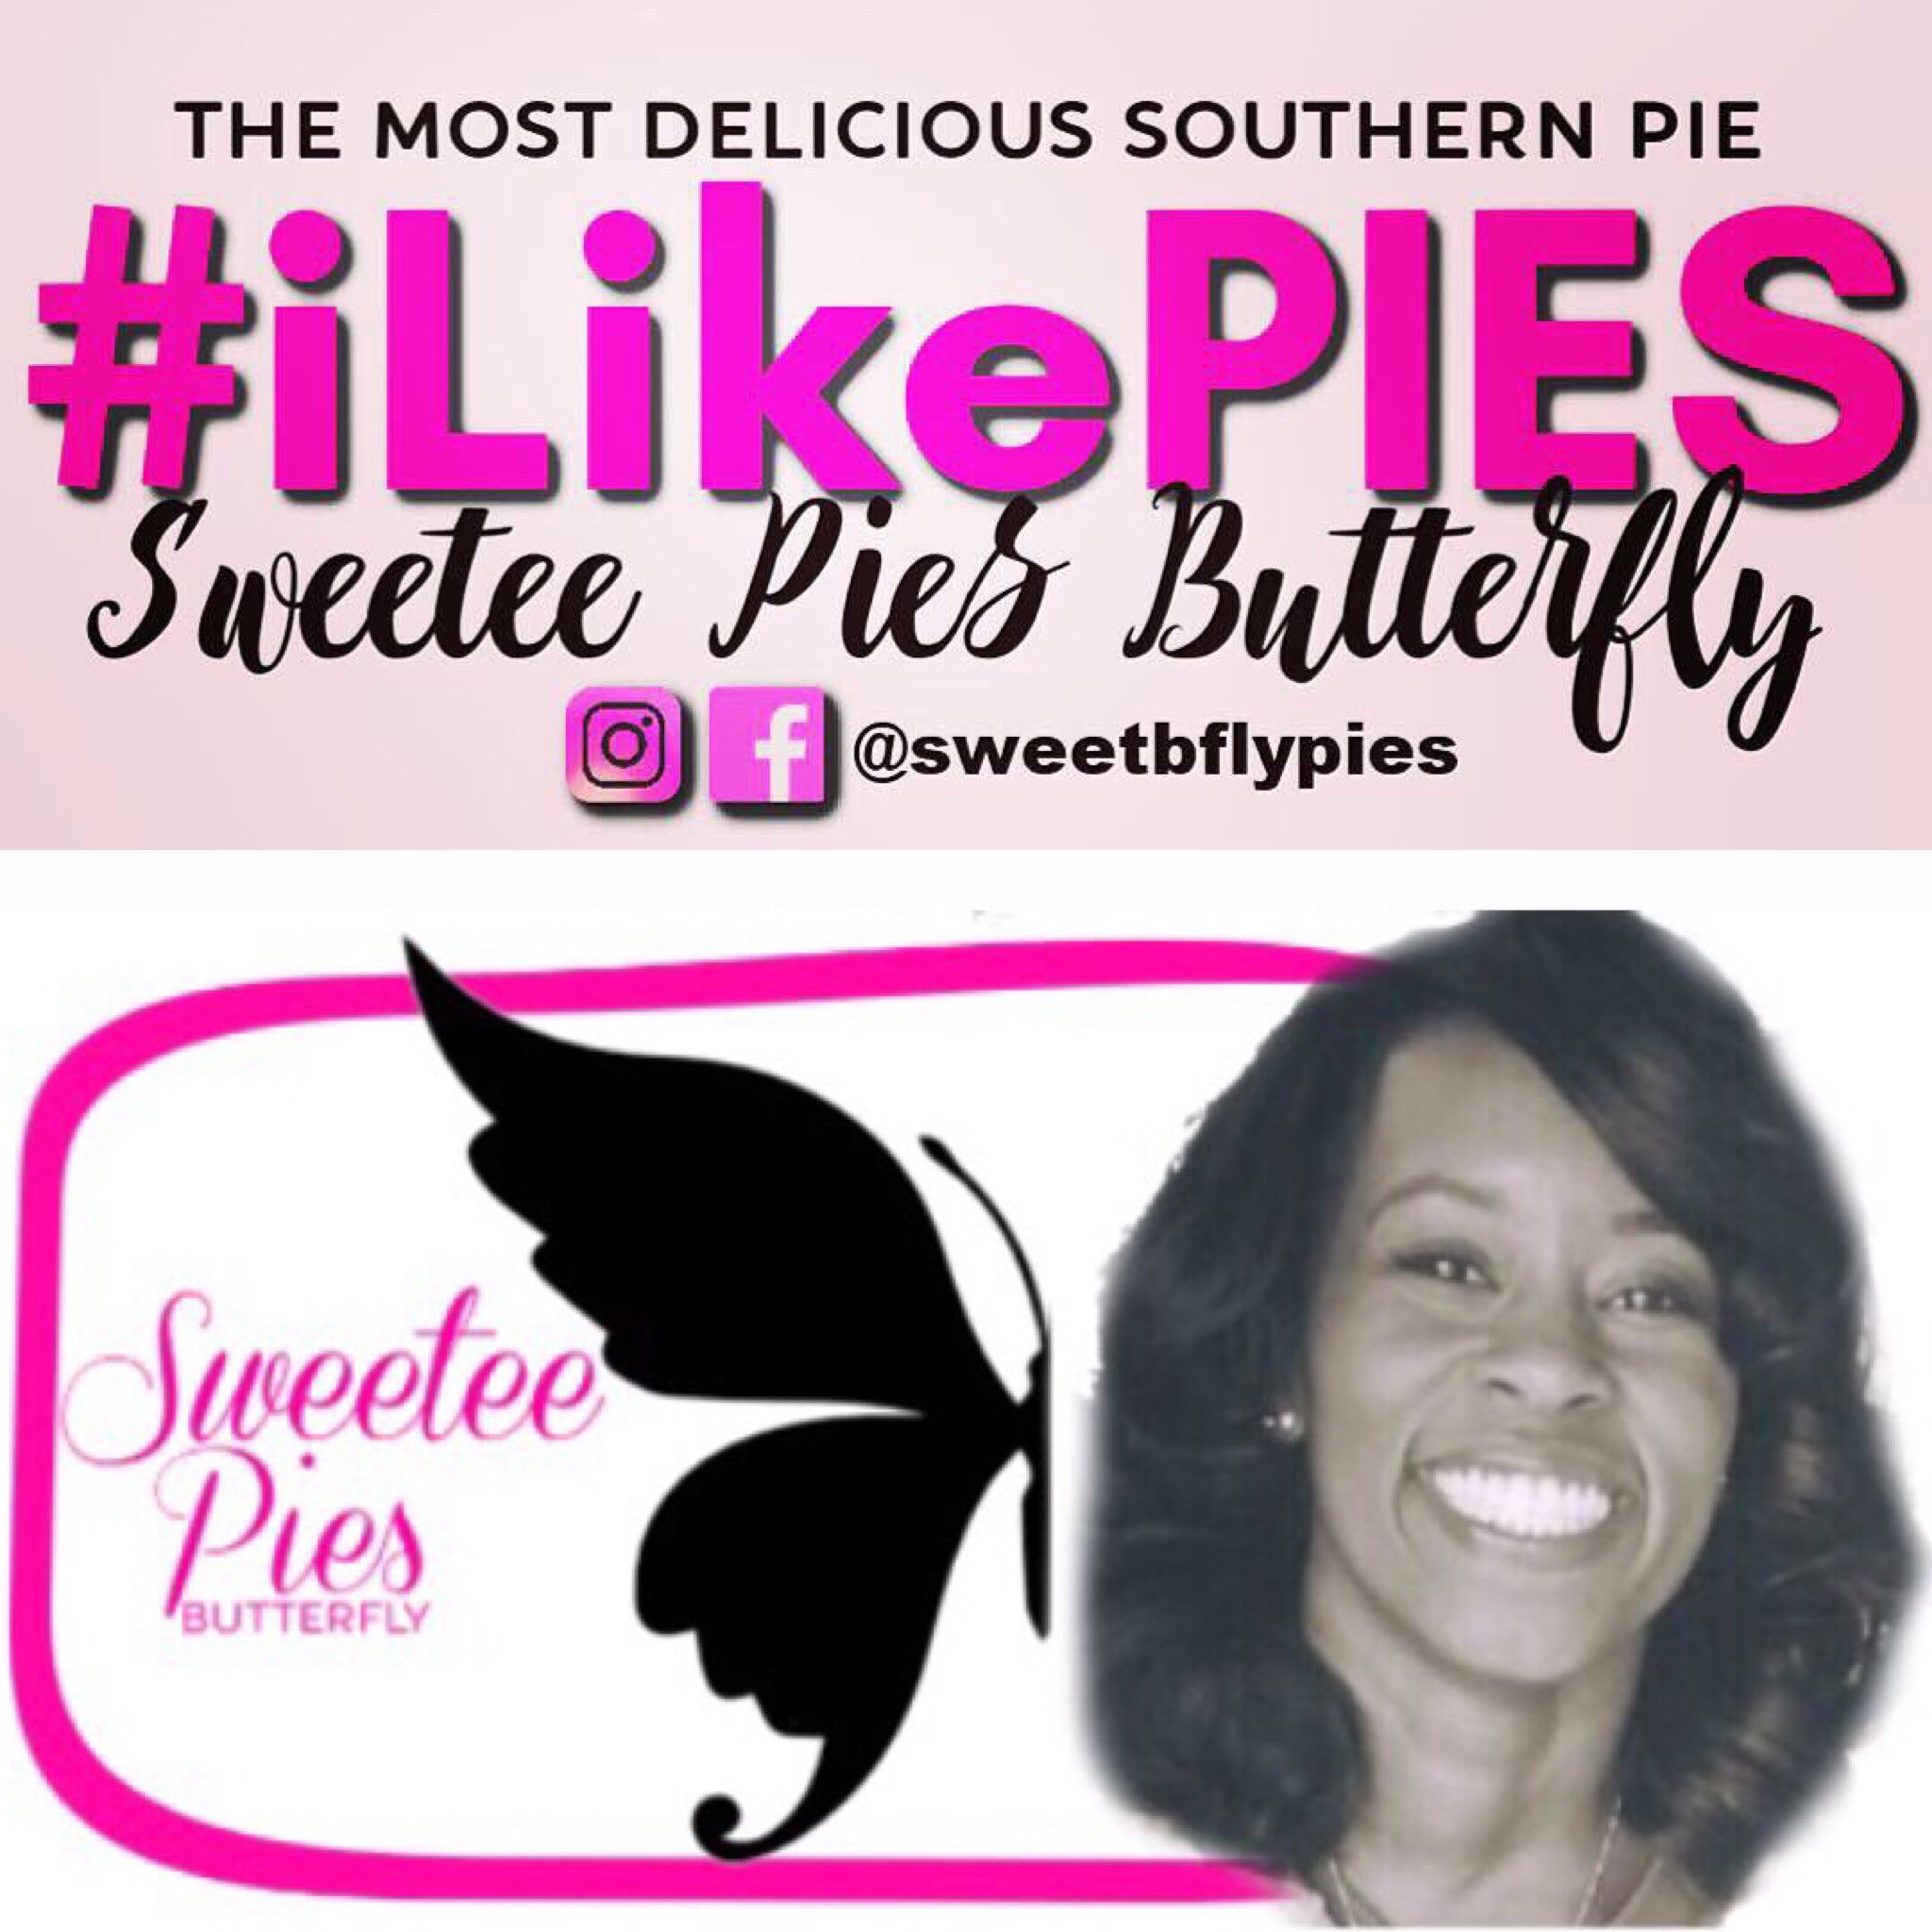 Kenyatta Martin and her Sweetee Pies Butterfly business